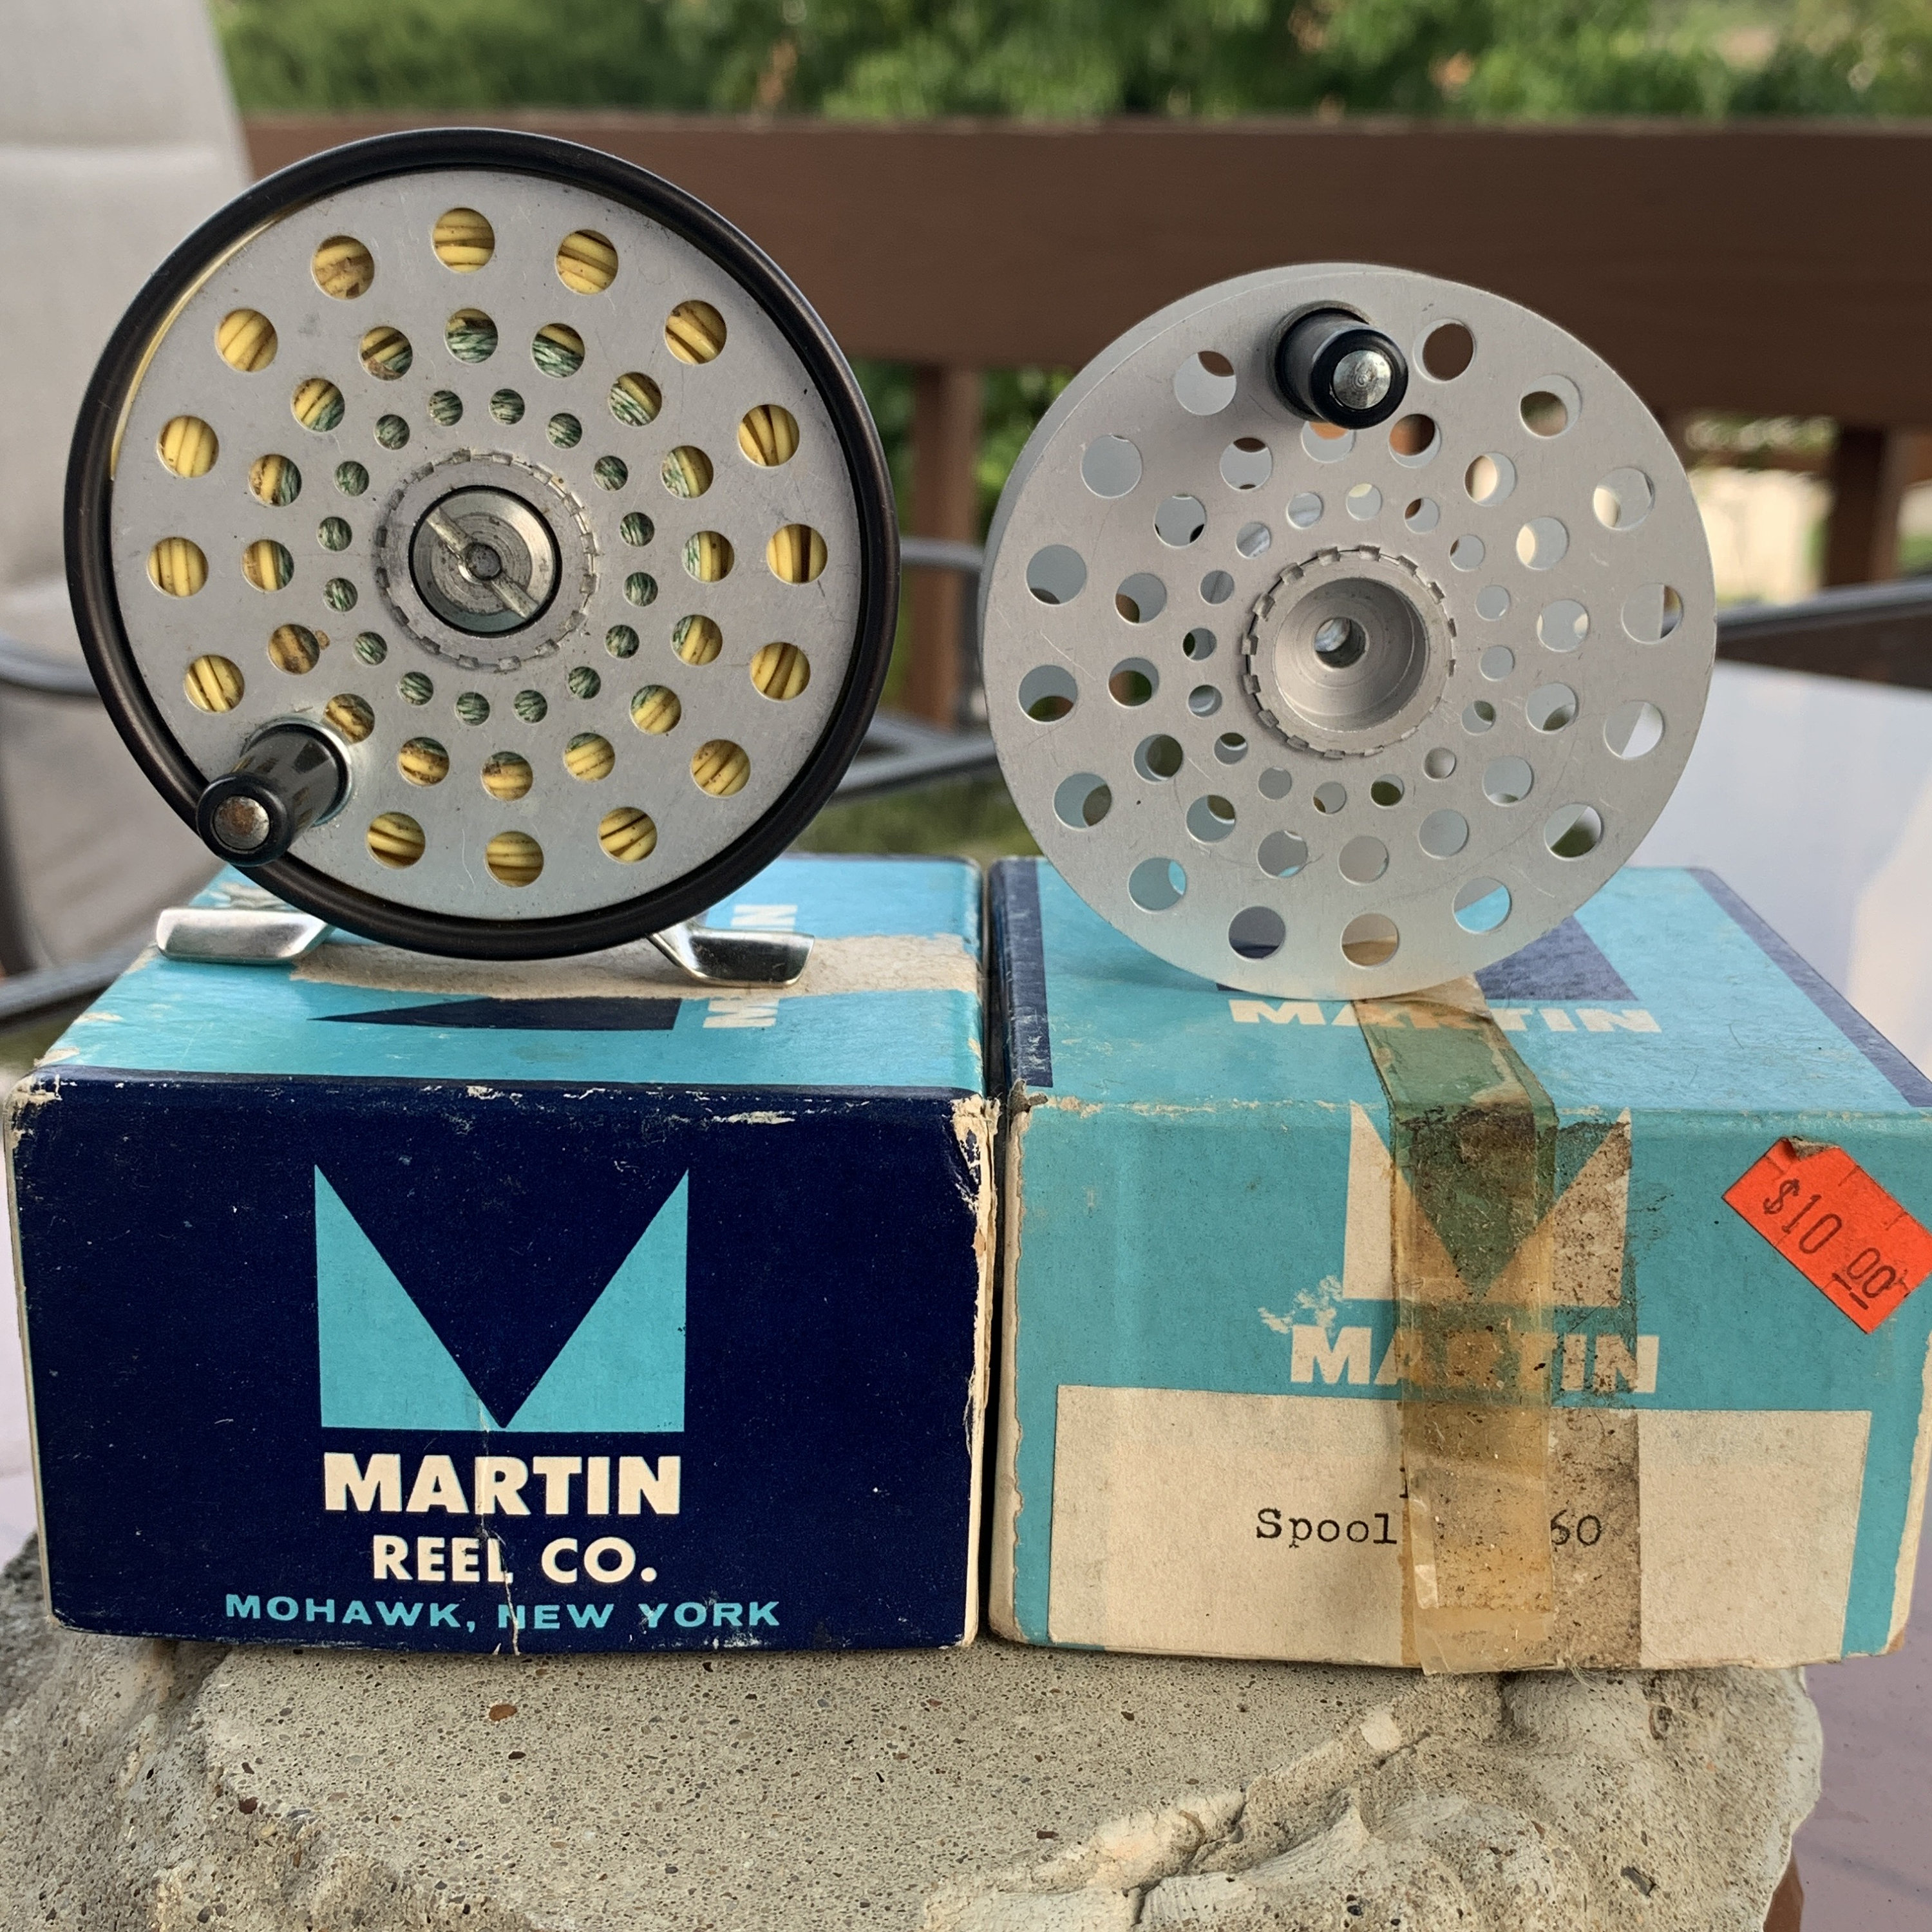 Martin Model 60 Fly Reel W/ Extra Spool Both in Box With Papers